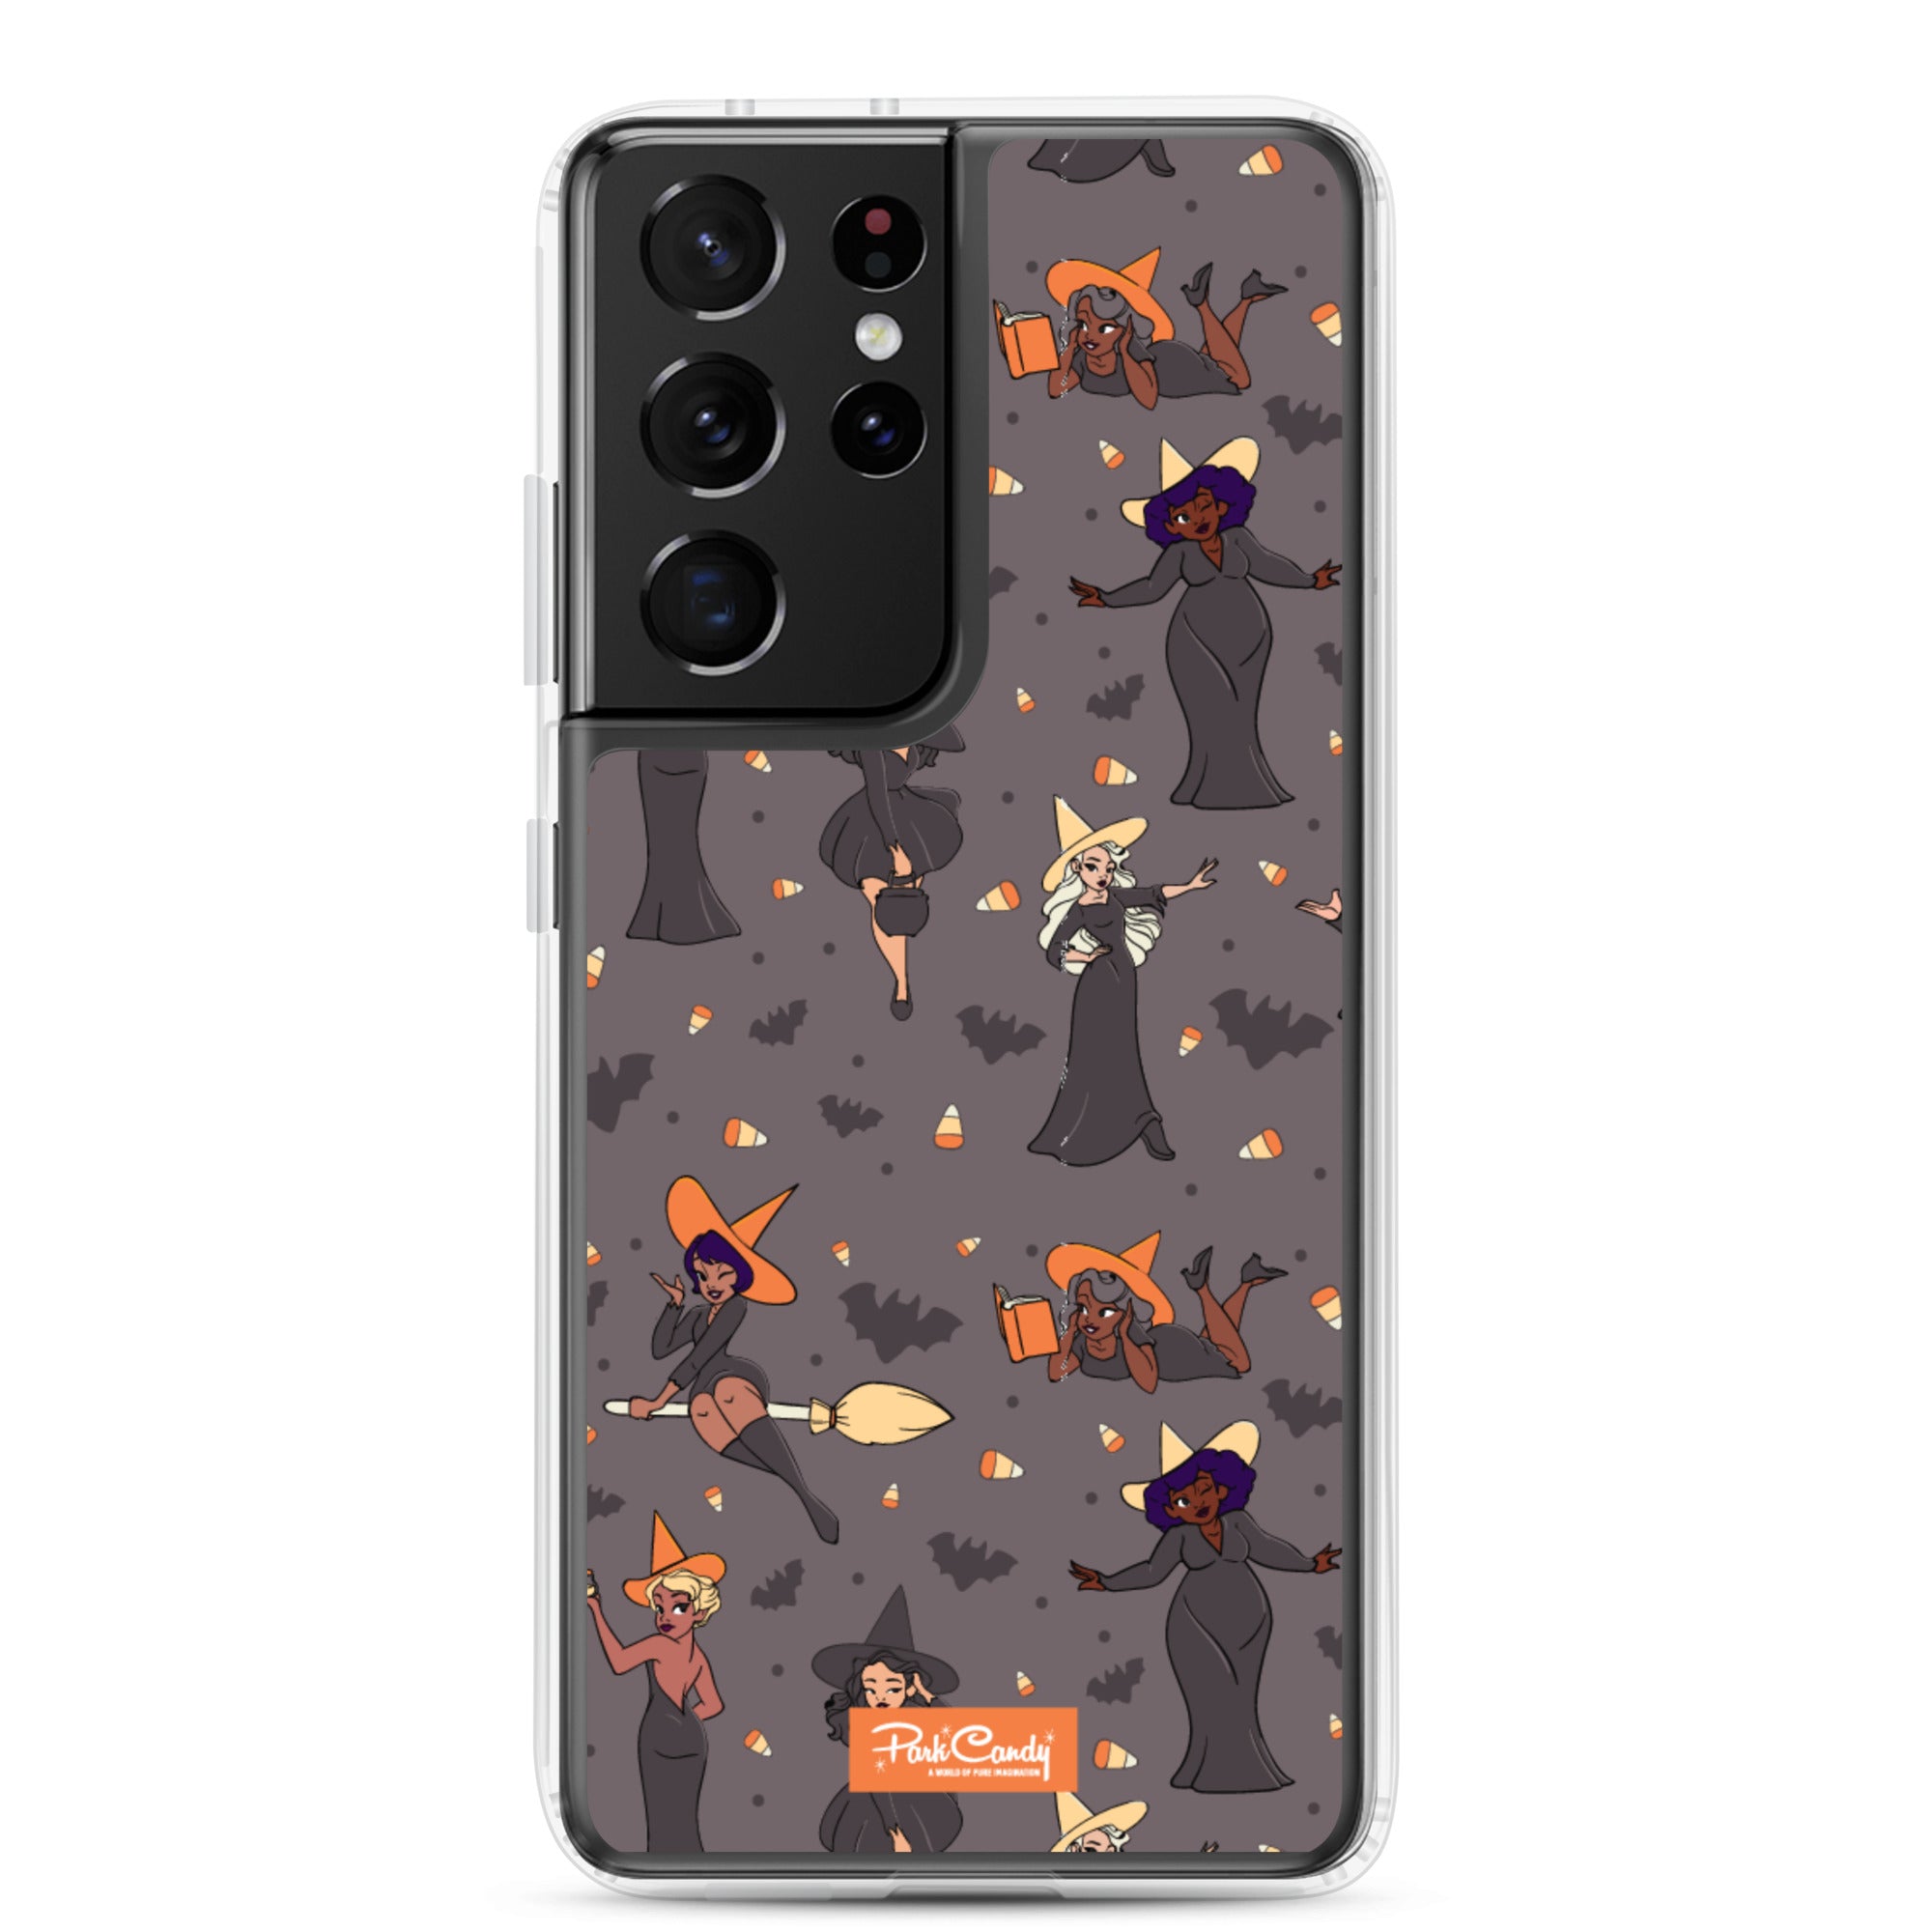 Totally Witchin' Samsung Case - Park Candy